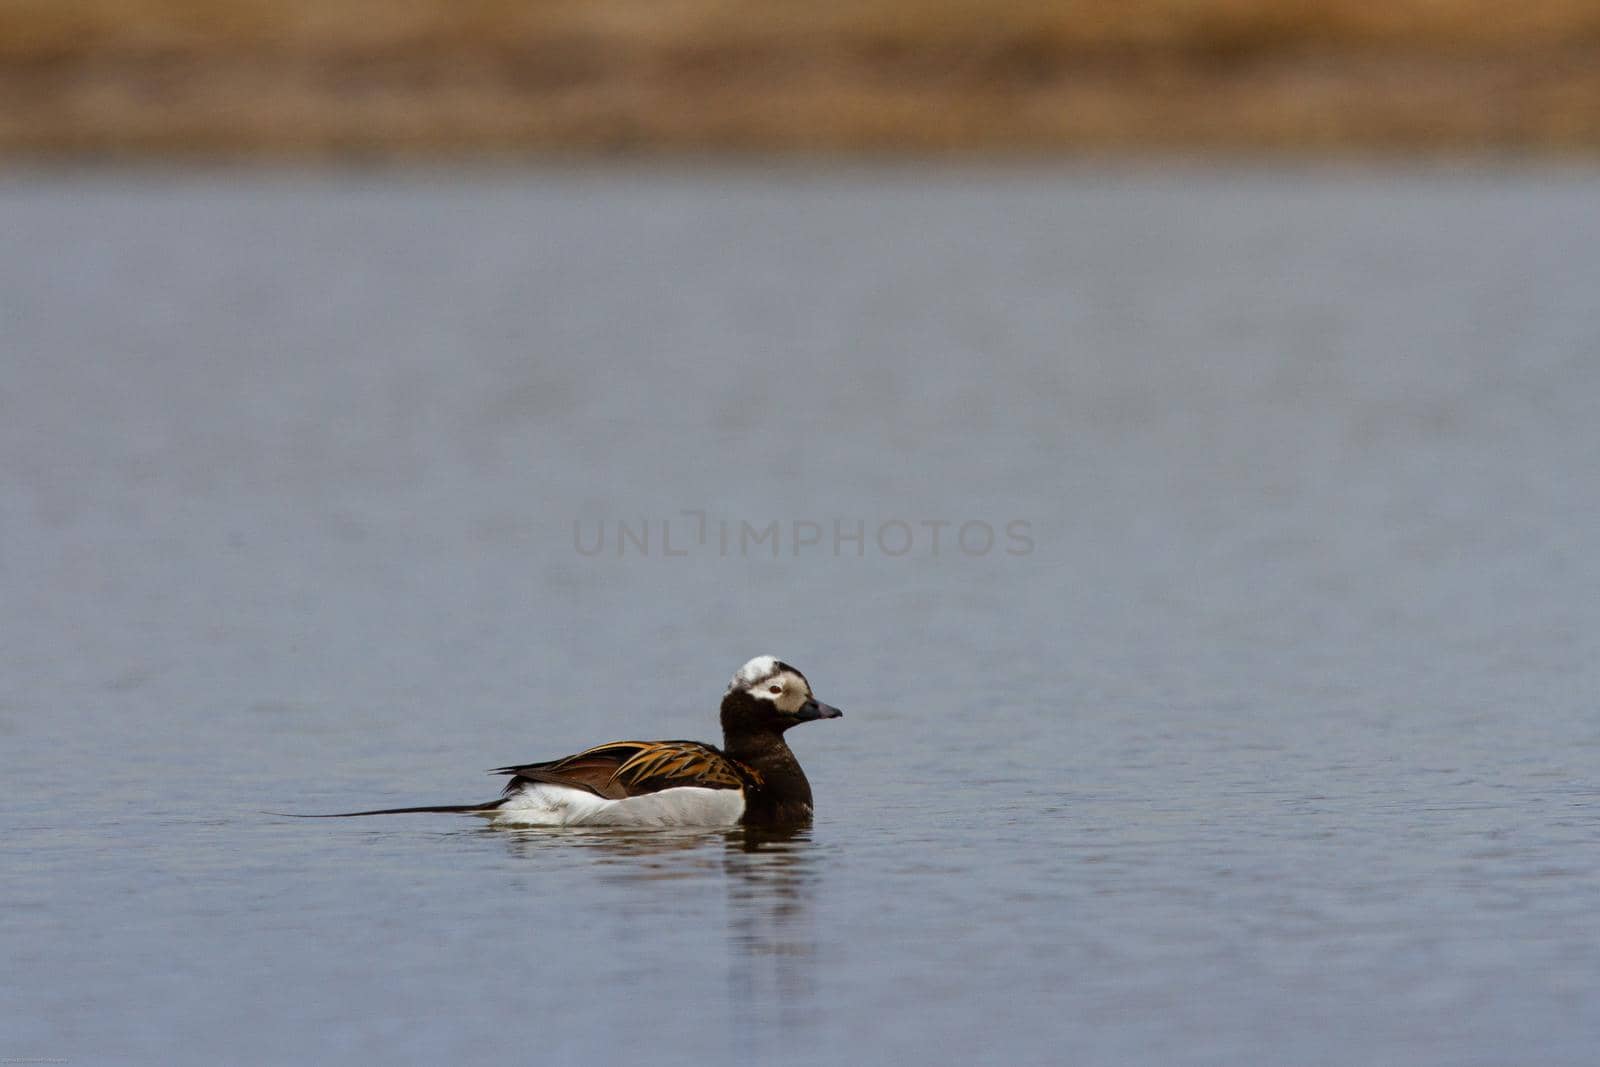 Male long-tailed duck swimming in a small pond, near Arviat, Nunavut Canada